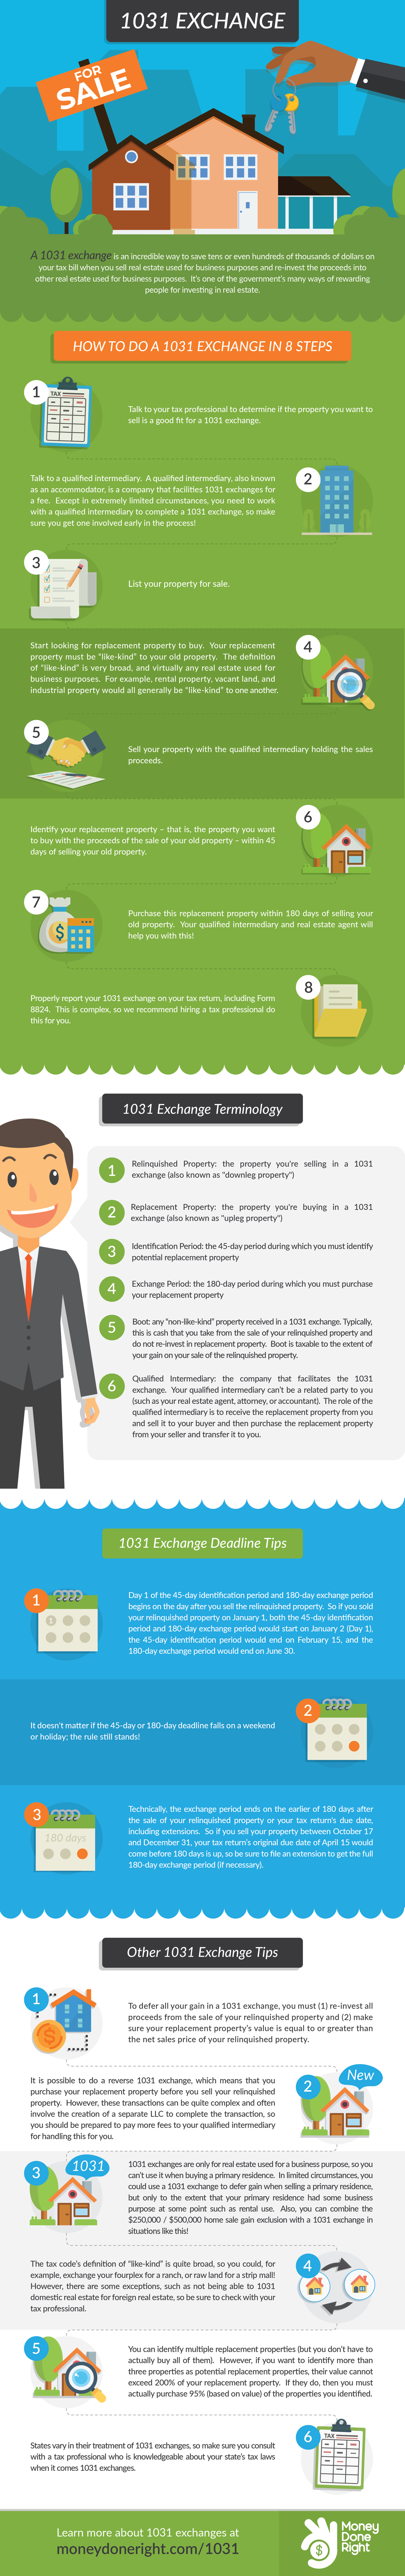 1031 Exchange Rules 2020: What Is a 1031 Exchange?
